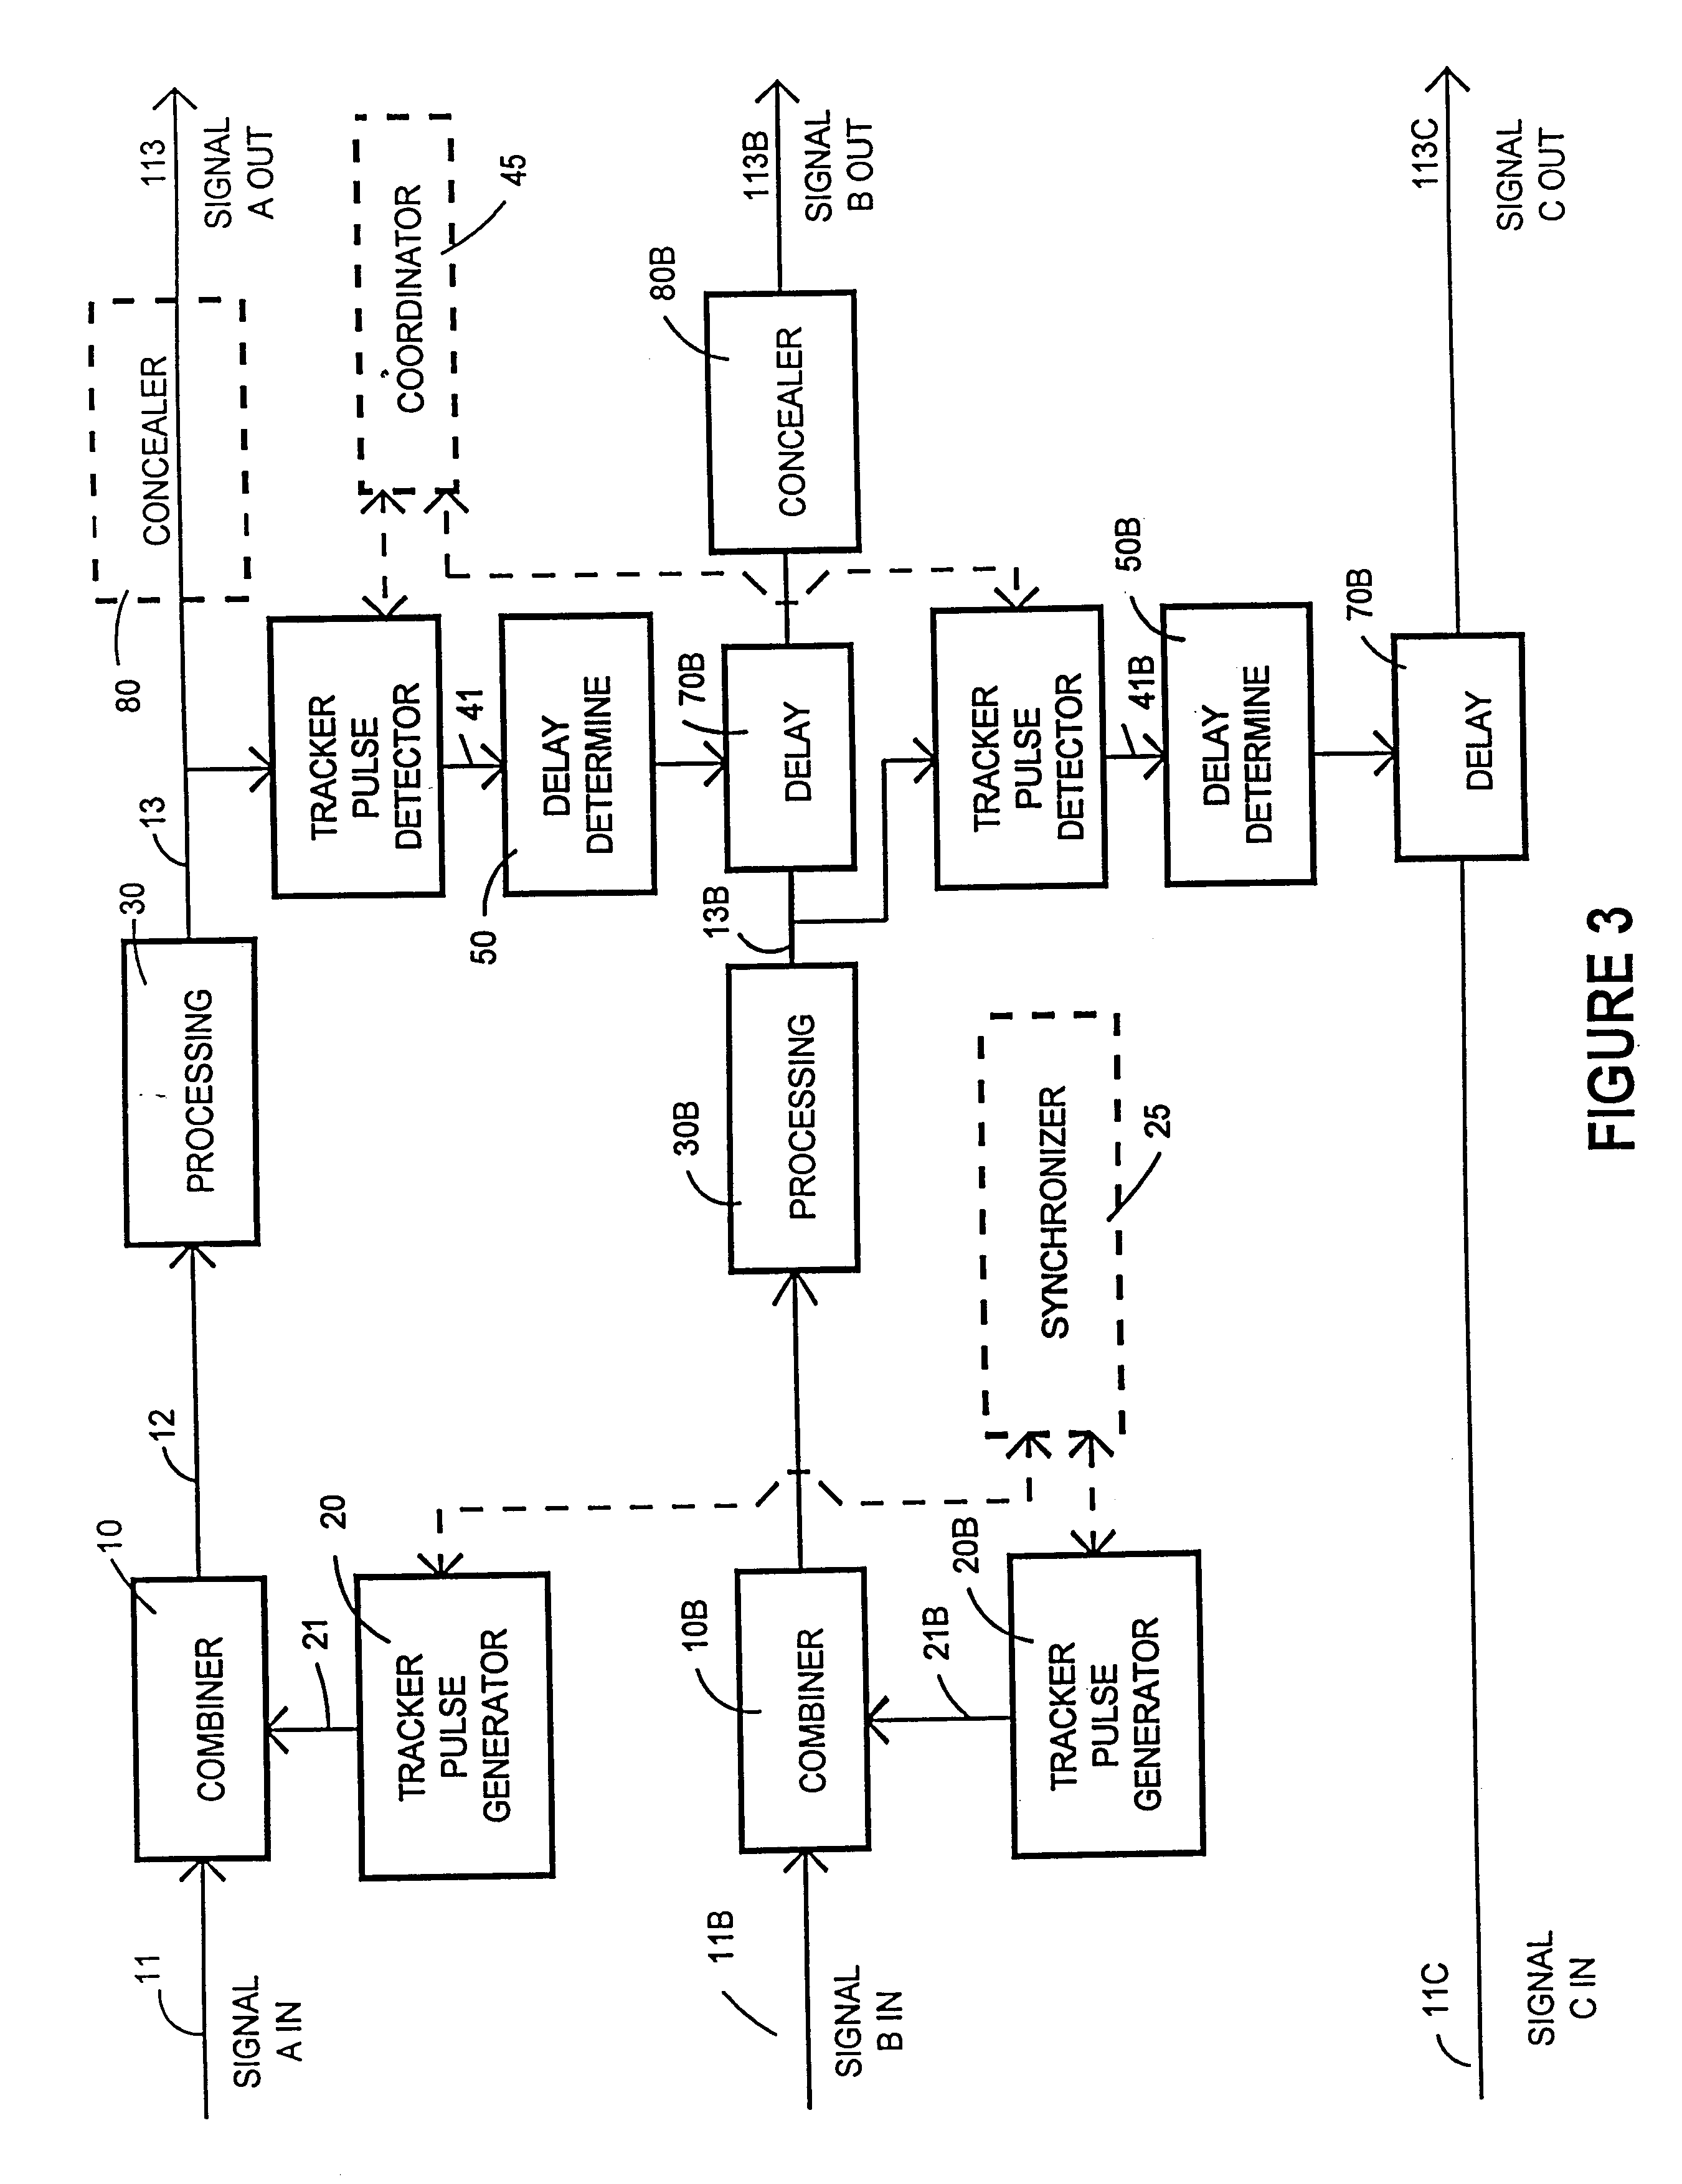 Pulse detector for ascertaining the processing delay of a signal